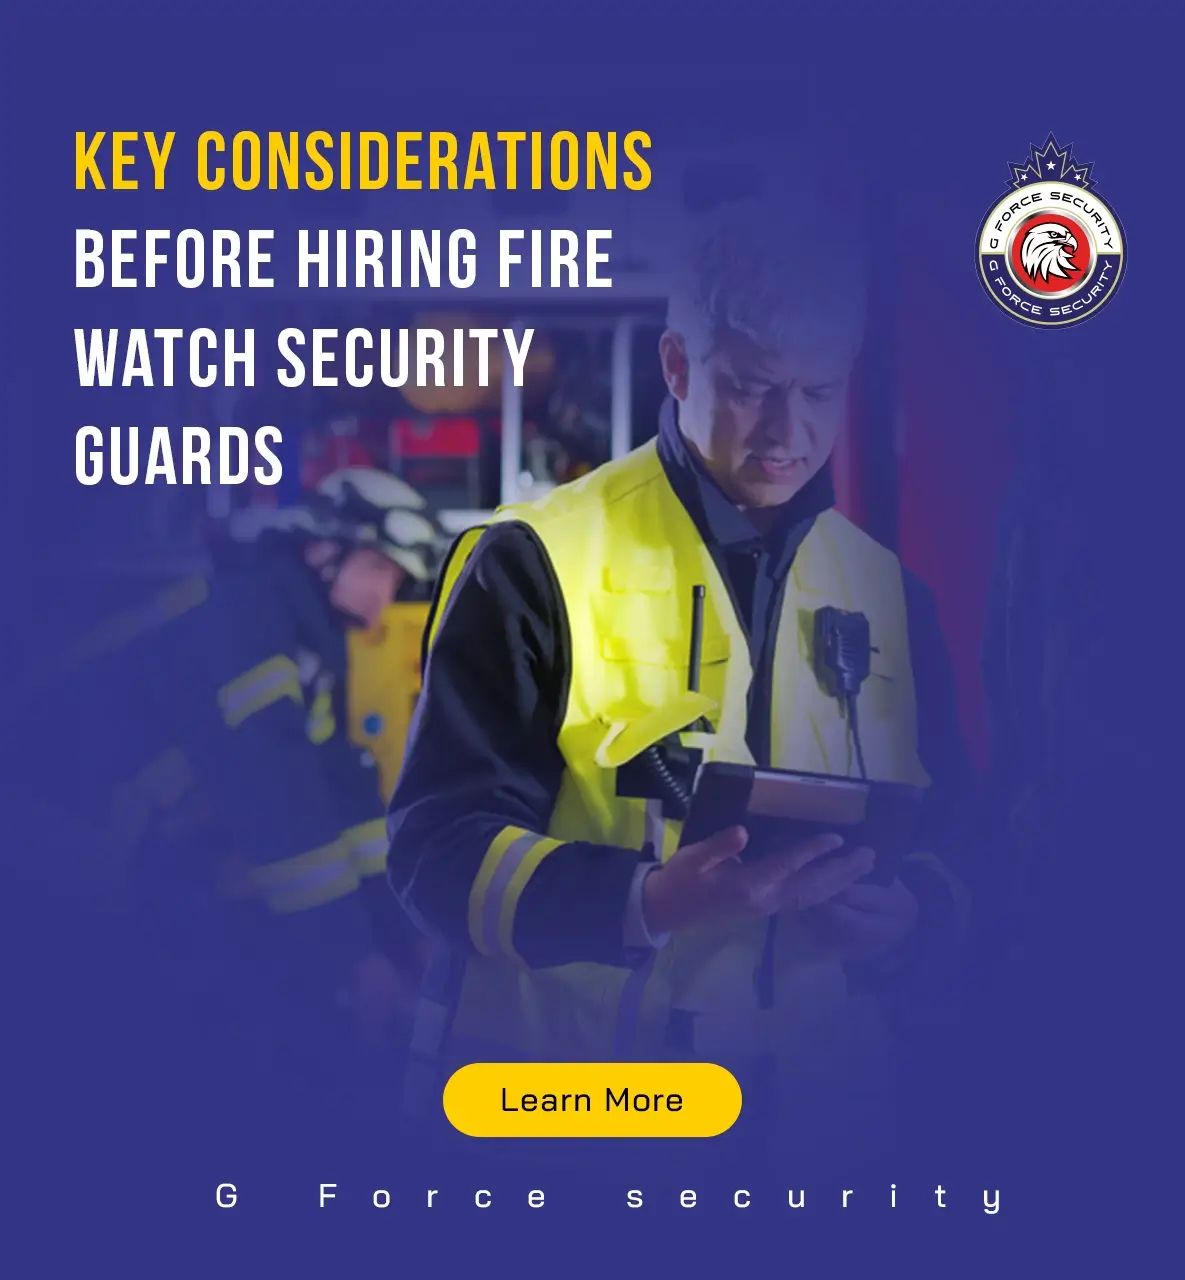 Key Considerations Before Hiring Fire Watch Security Guards